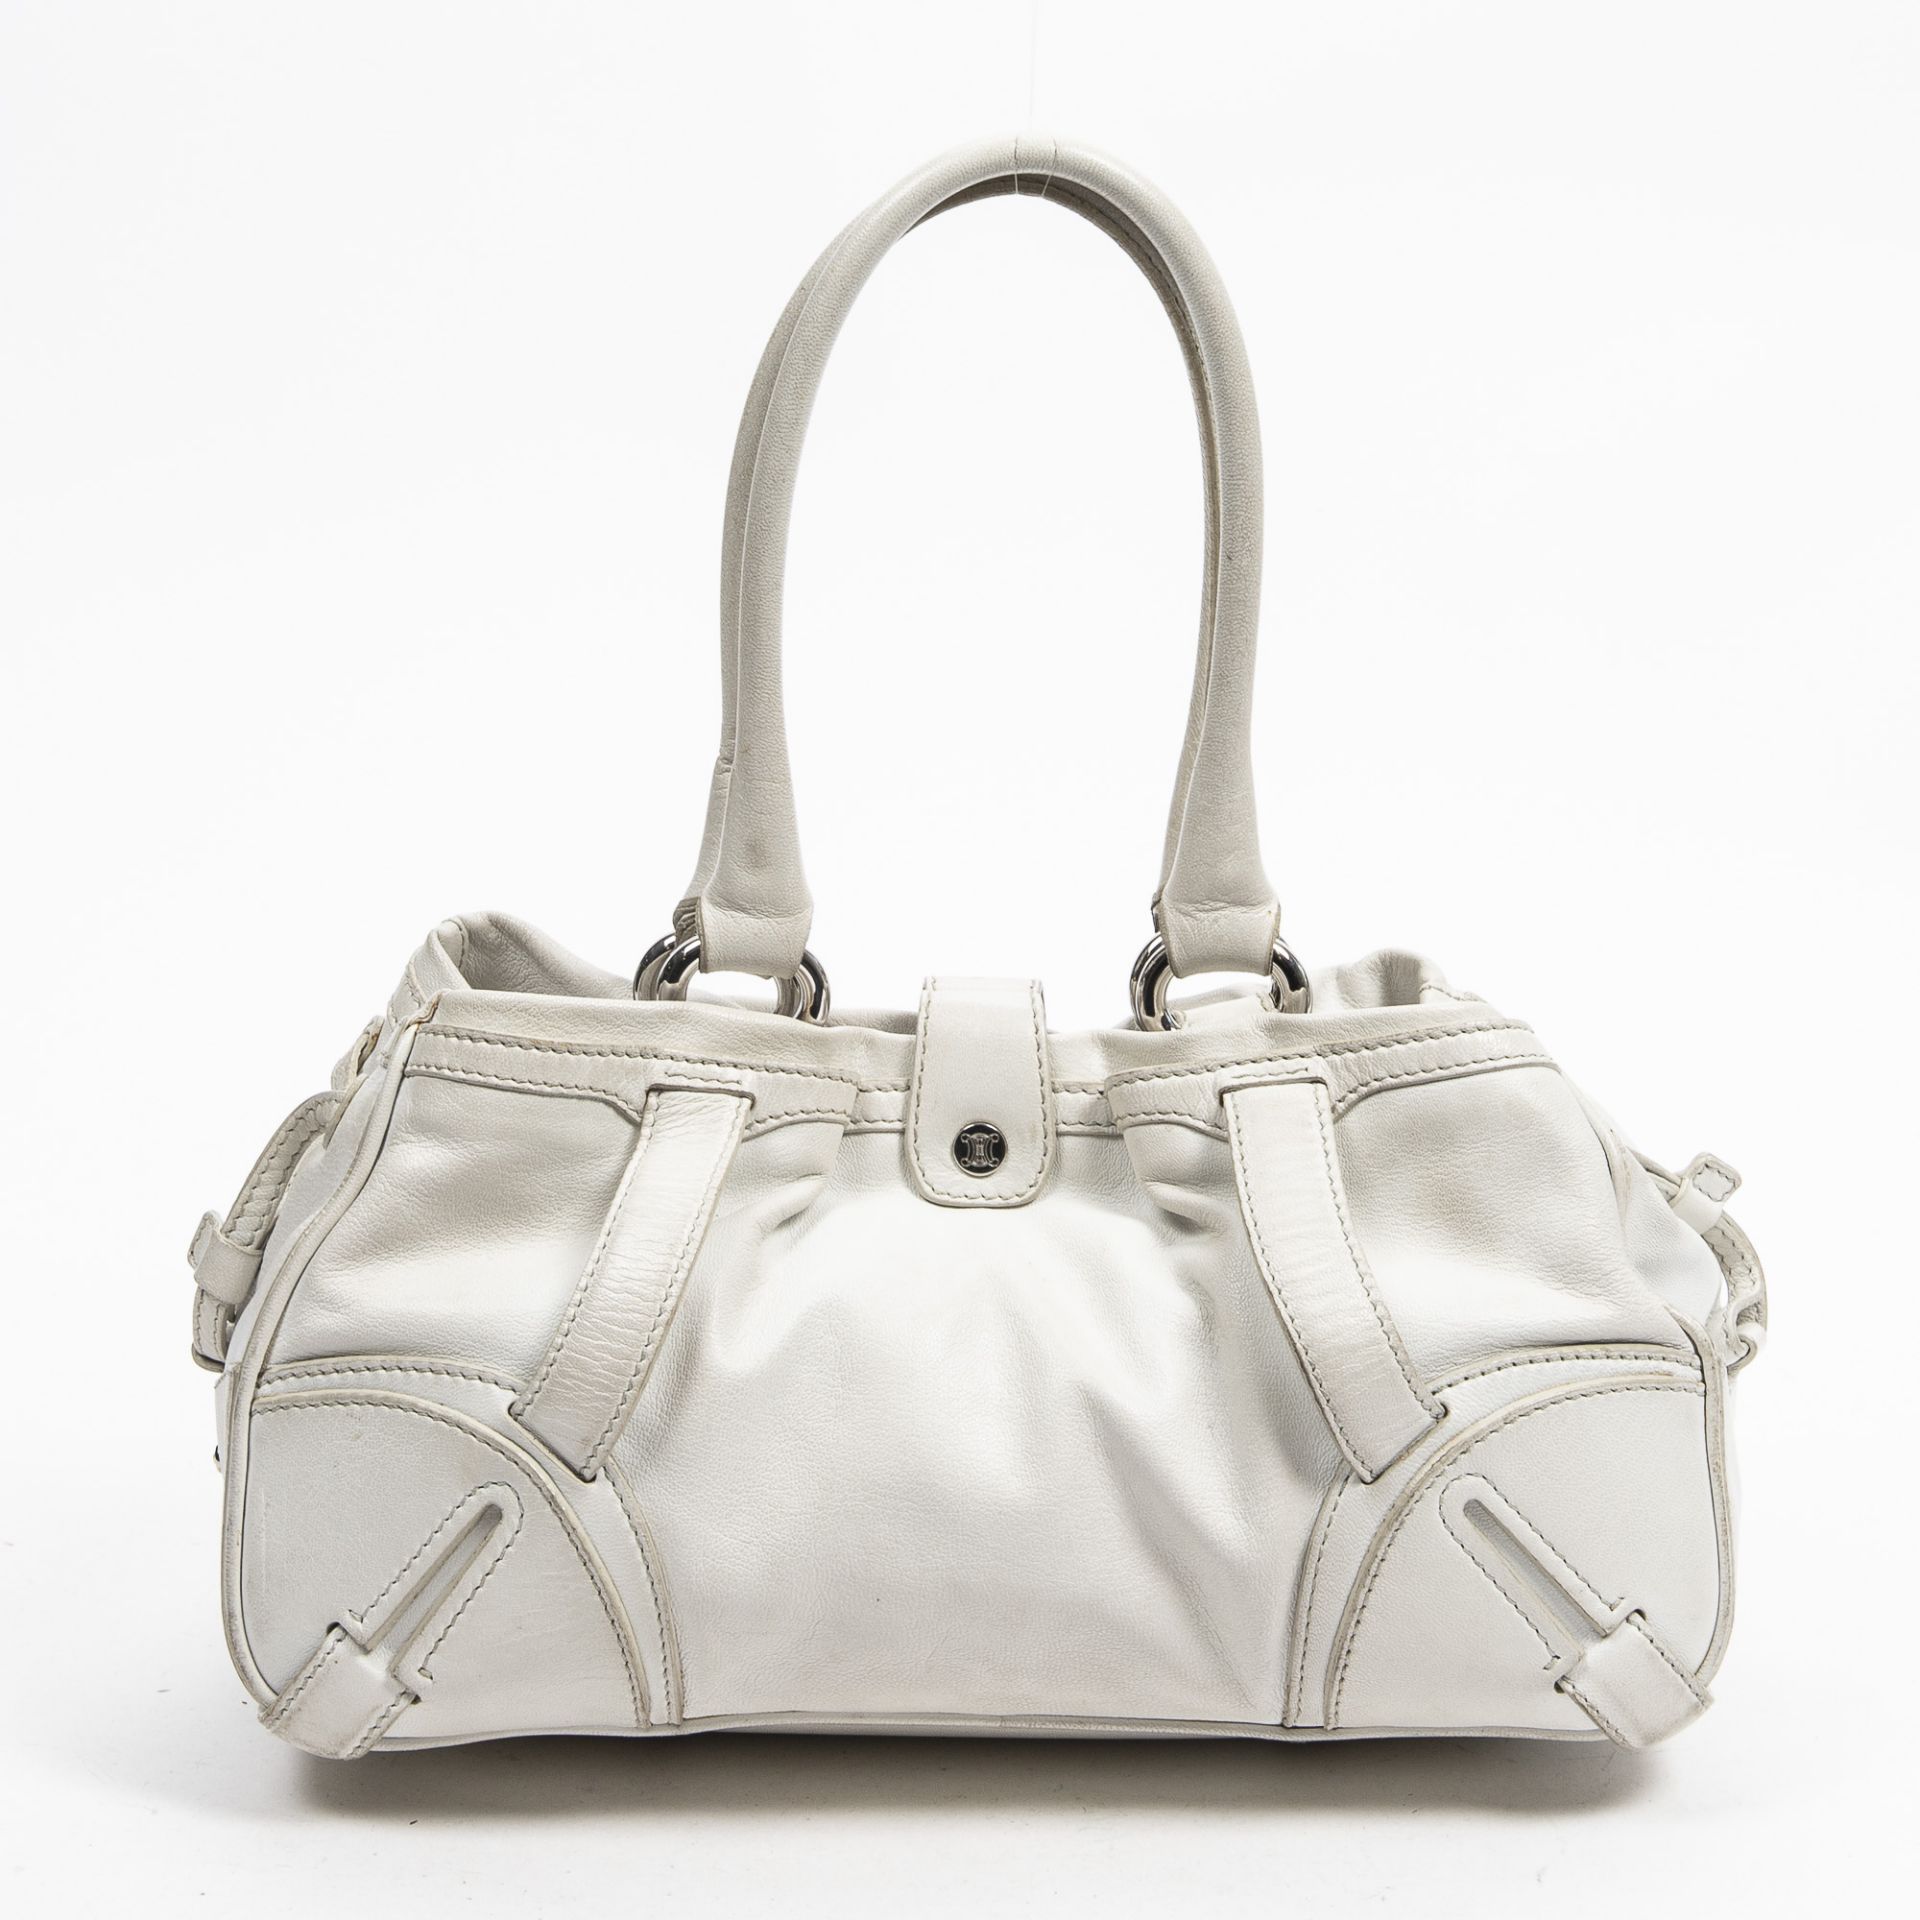 RRP £790.00 Lot To Contain 1 Celine Calf Leather Shoulder Tote Shoulder Bag In White - 34*19*